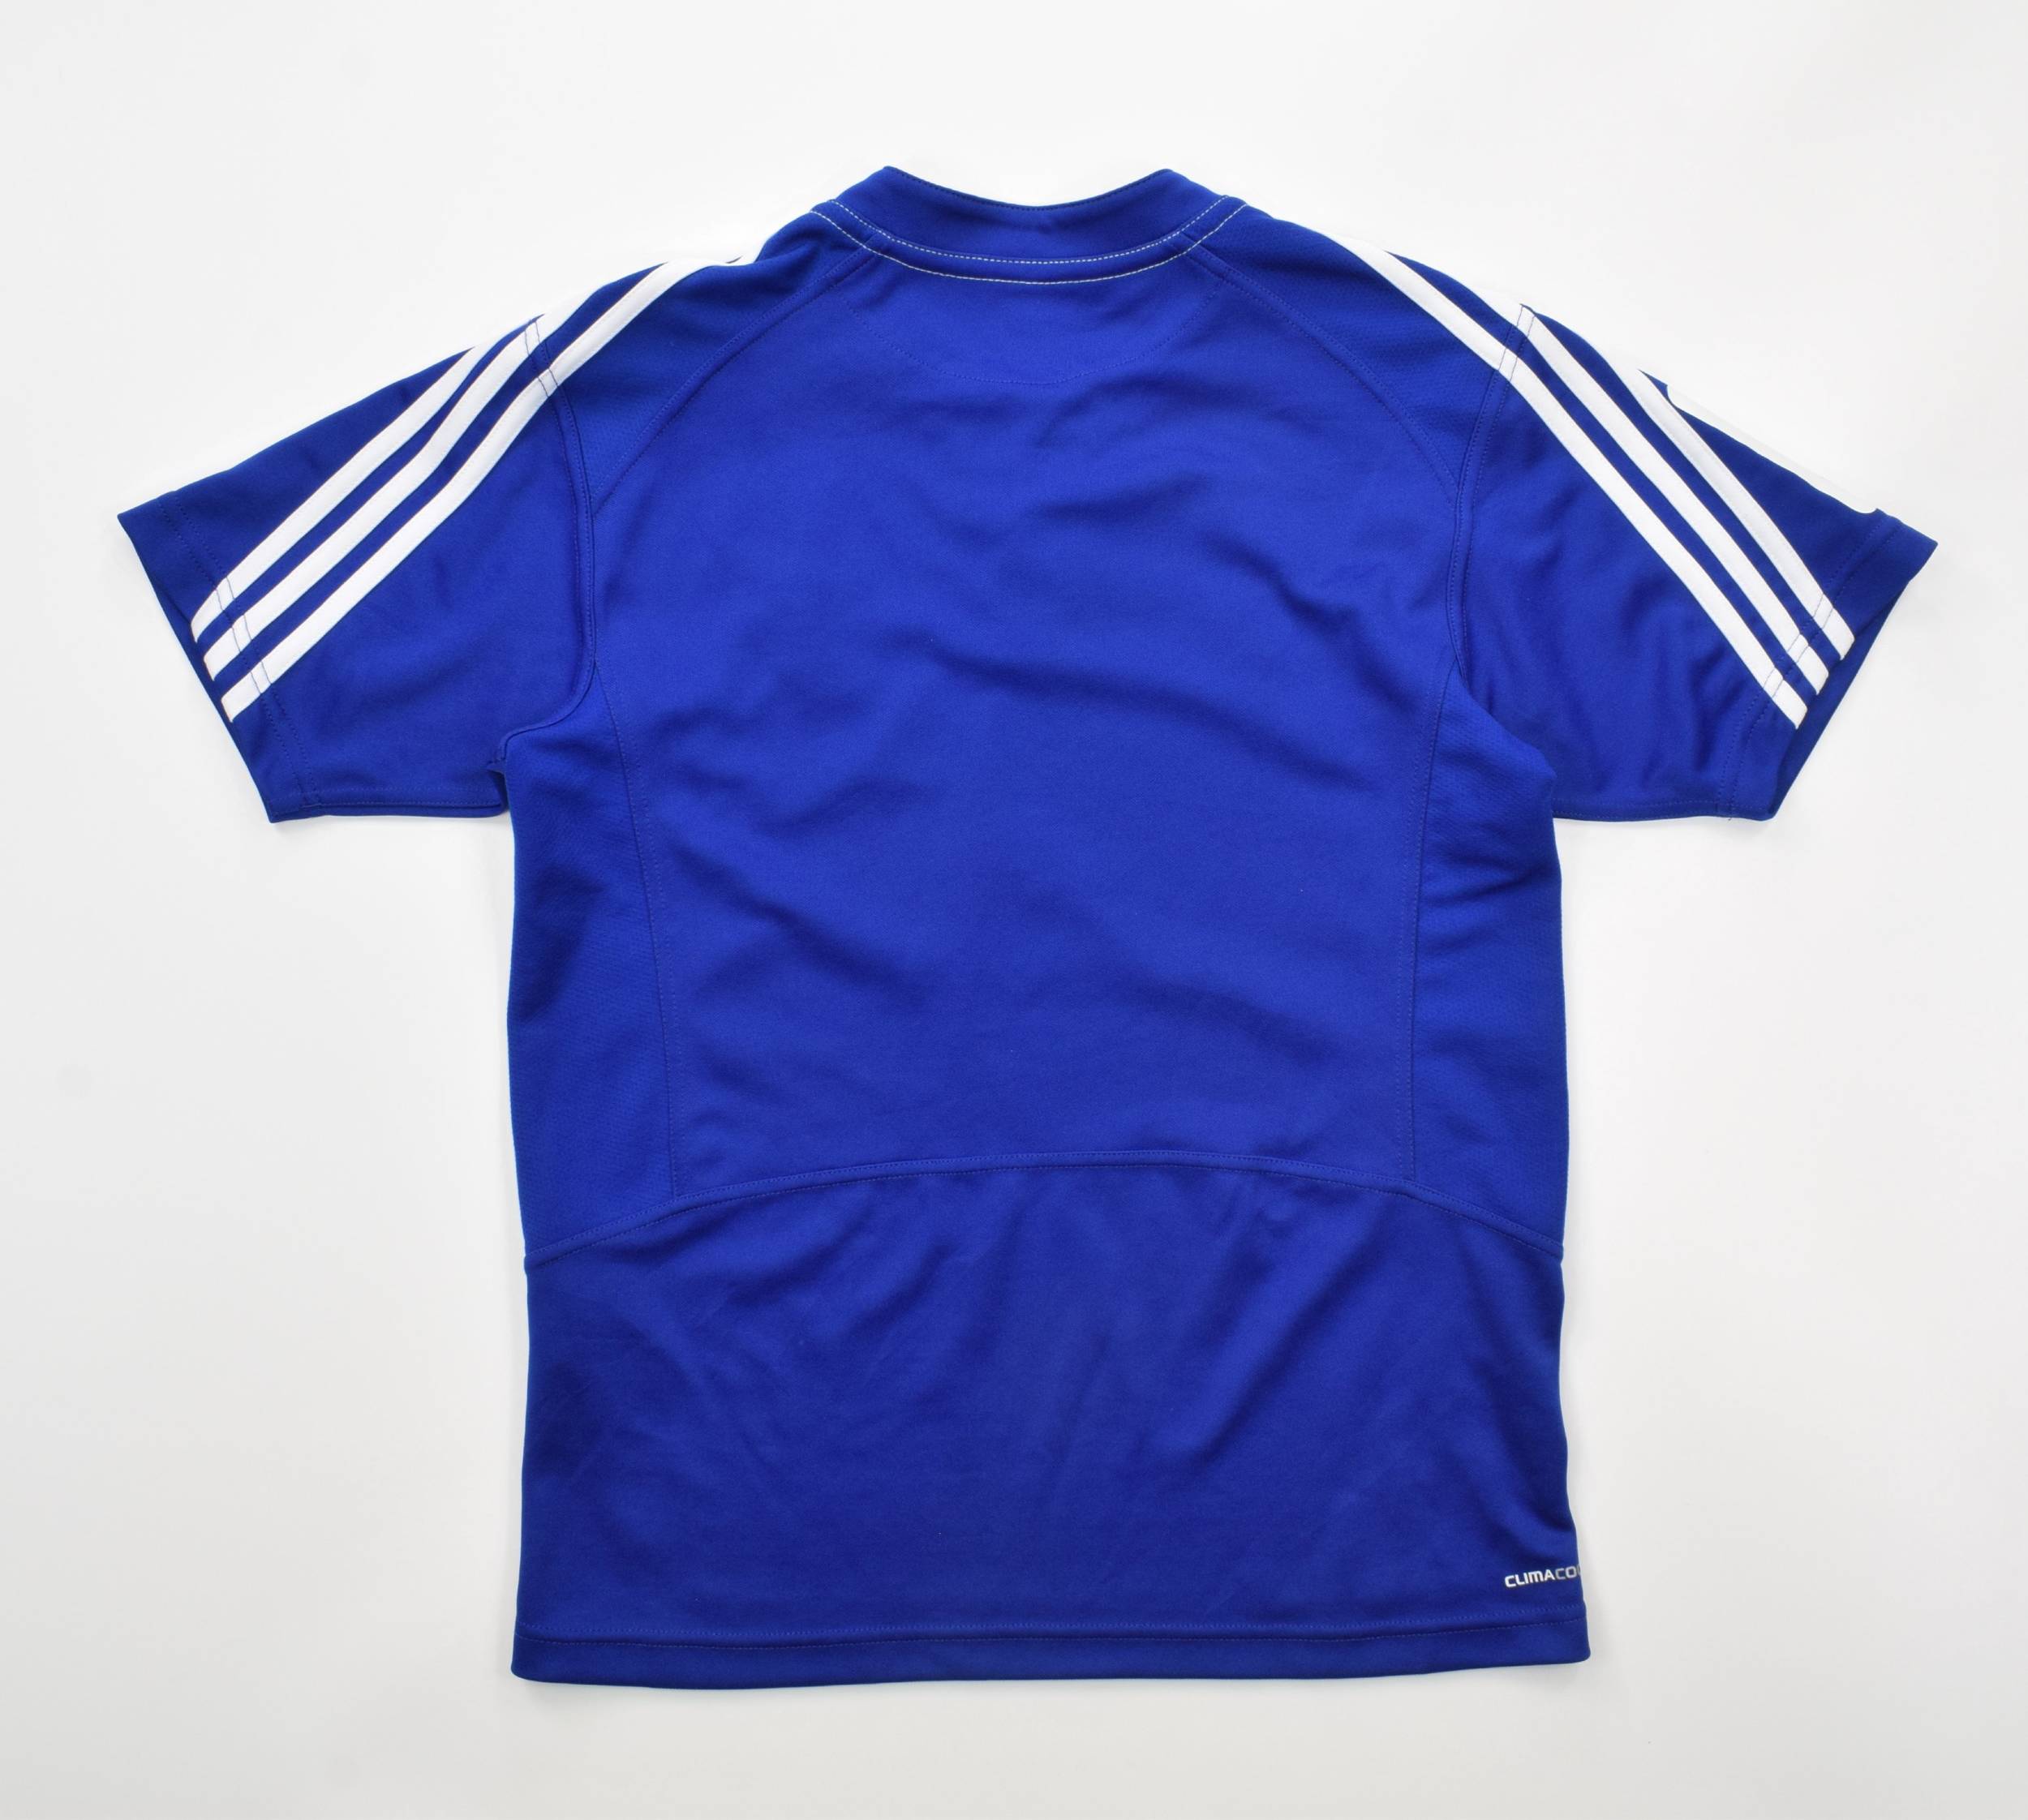 STORMERS RUGBY ADIDAS SHIRT S Rugby \ Rugby Union \ Stormers | Classic ...